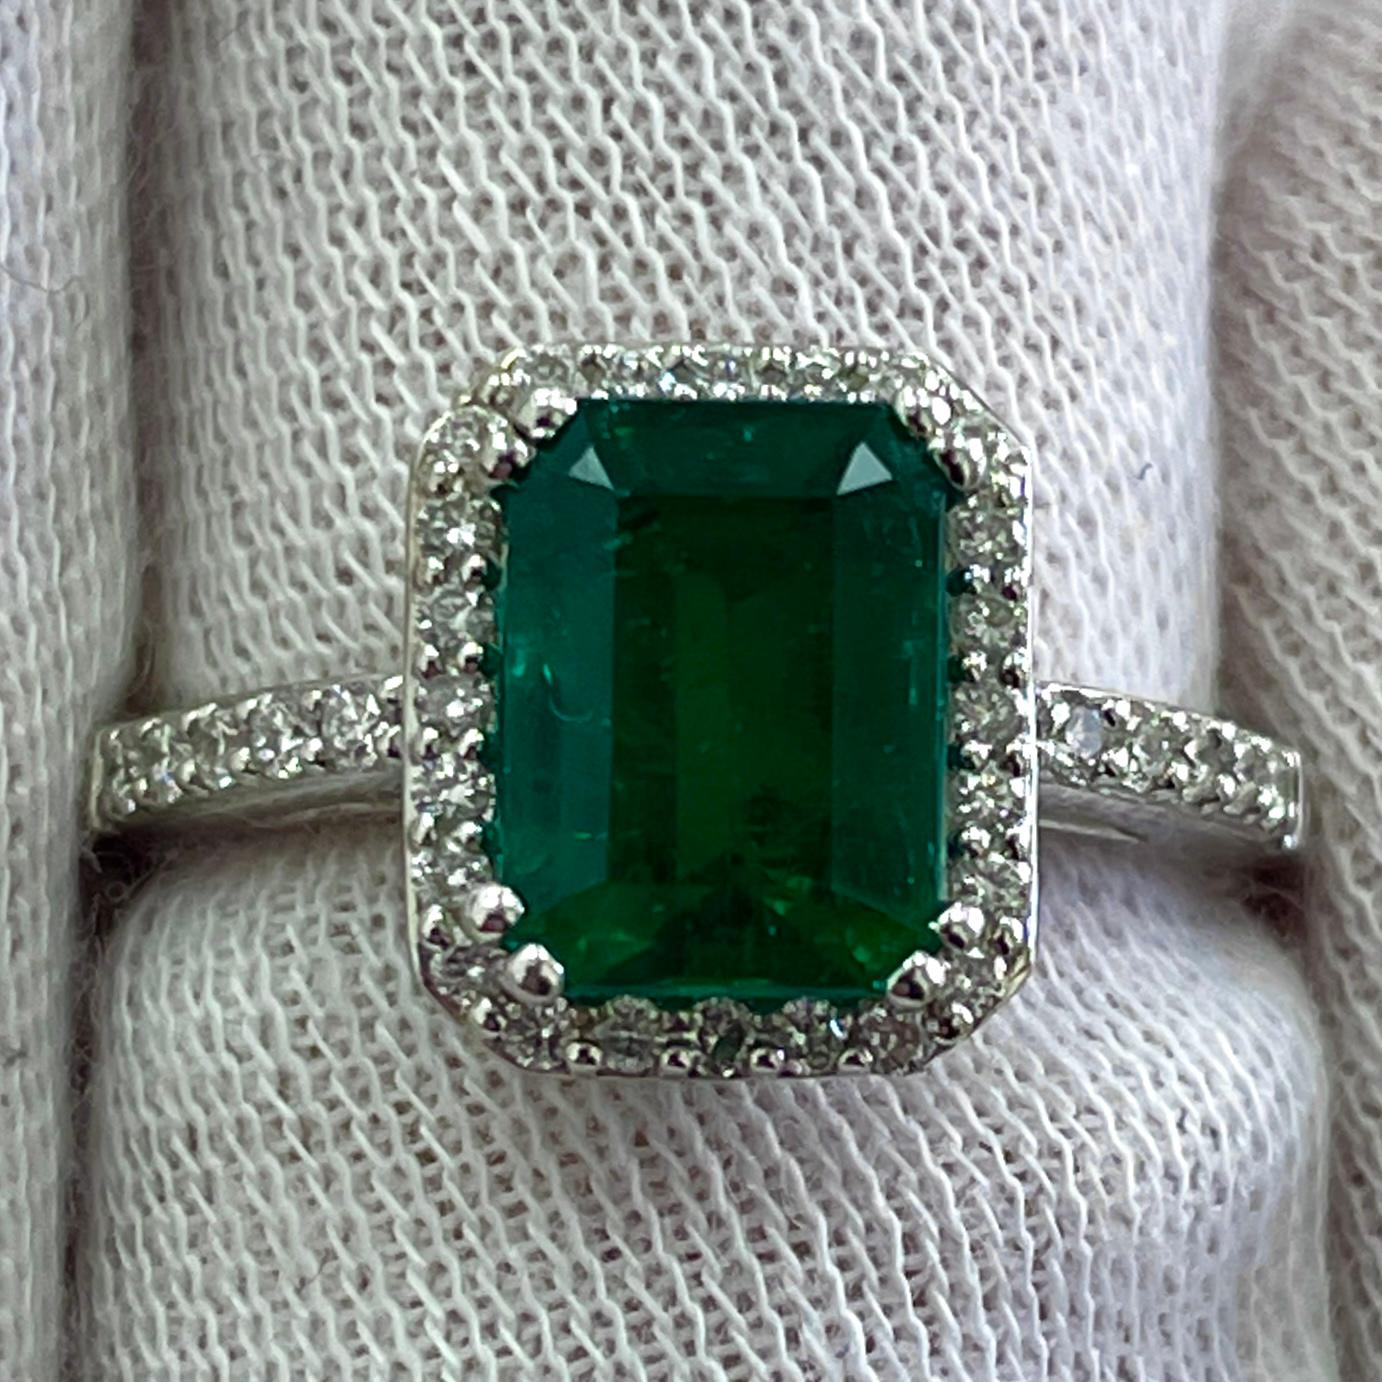 This is a rich green emerald, mounted in an elegant 18K white gold and diamond ring with 0.27Ct of brilliant white diamonds. Suitable for any occasion!